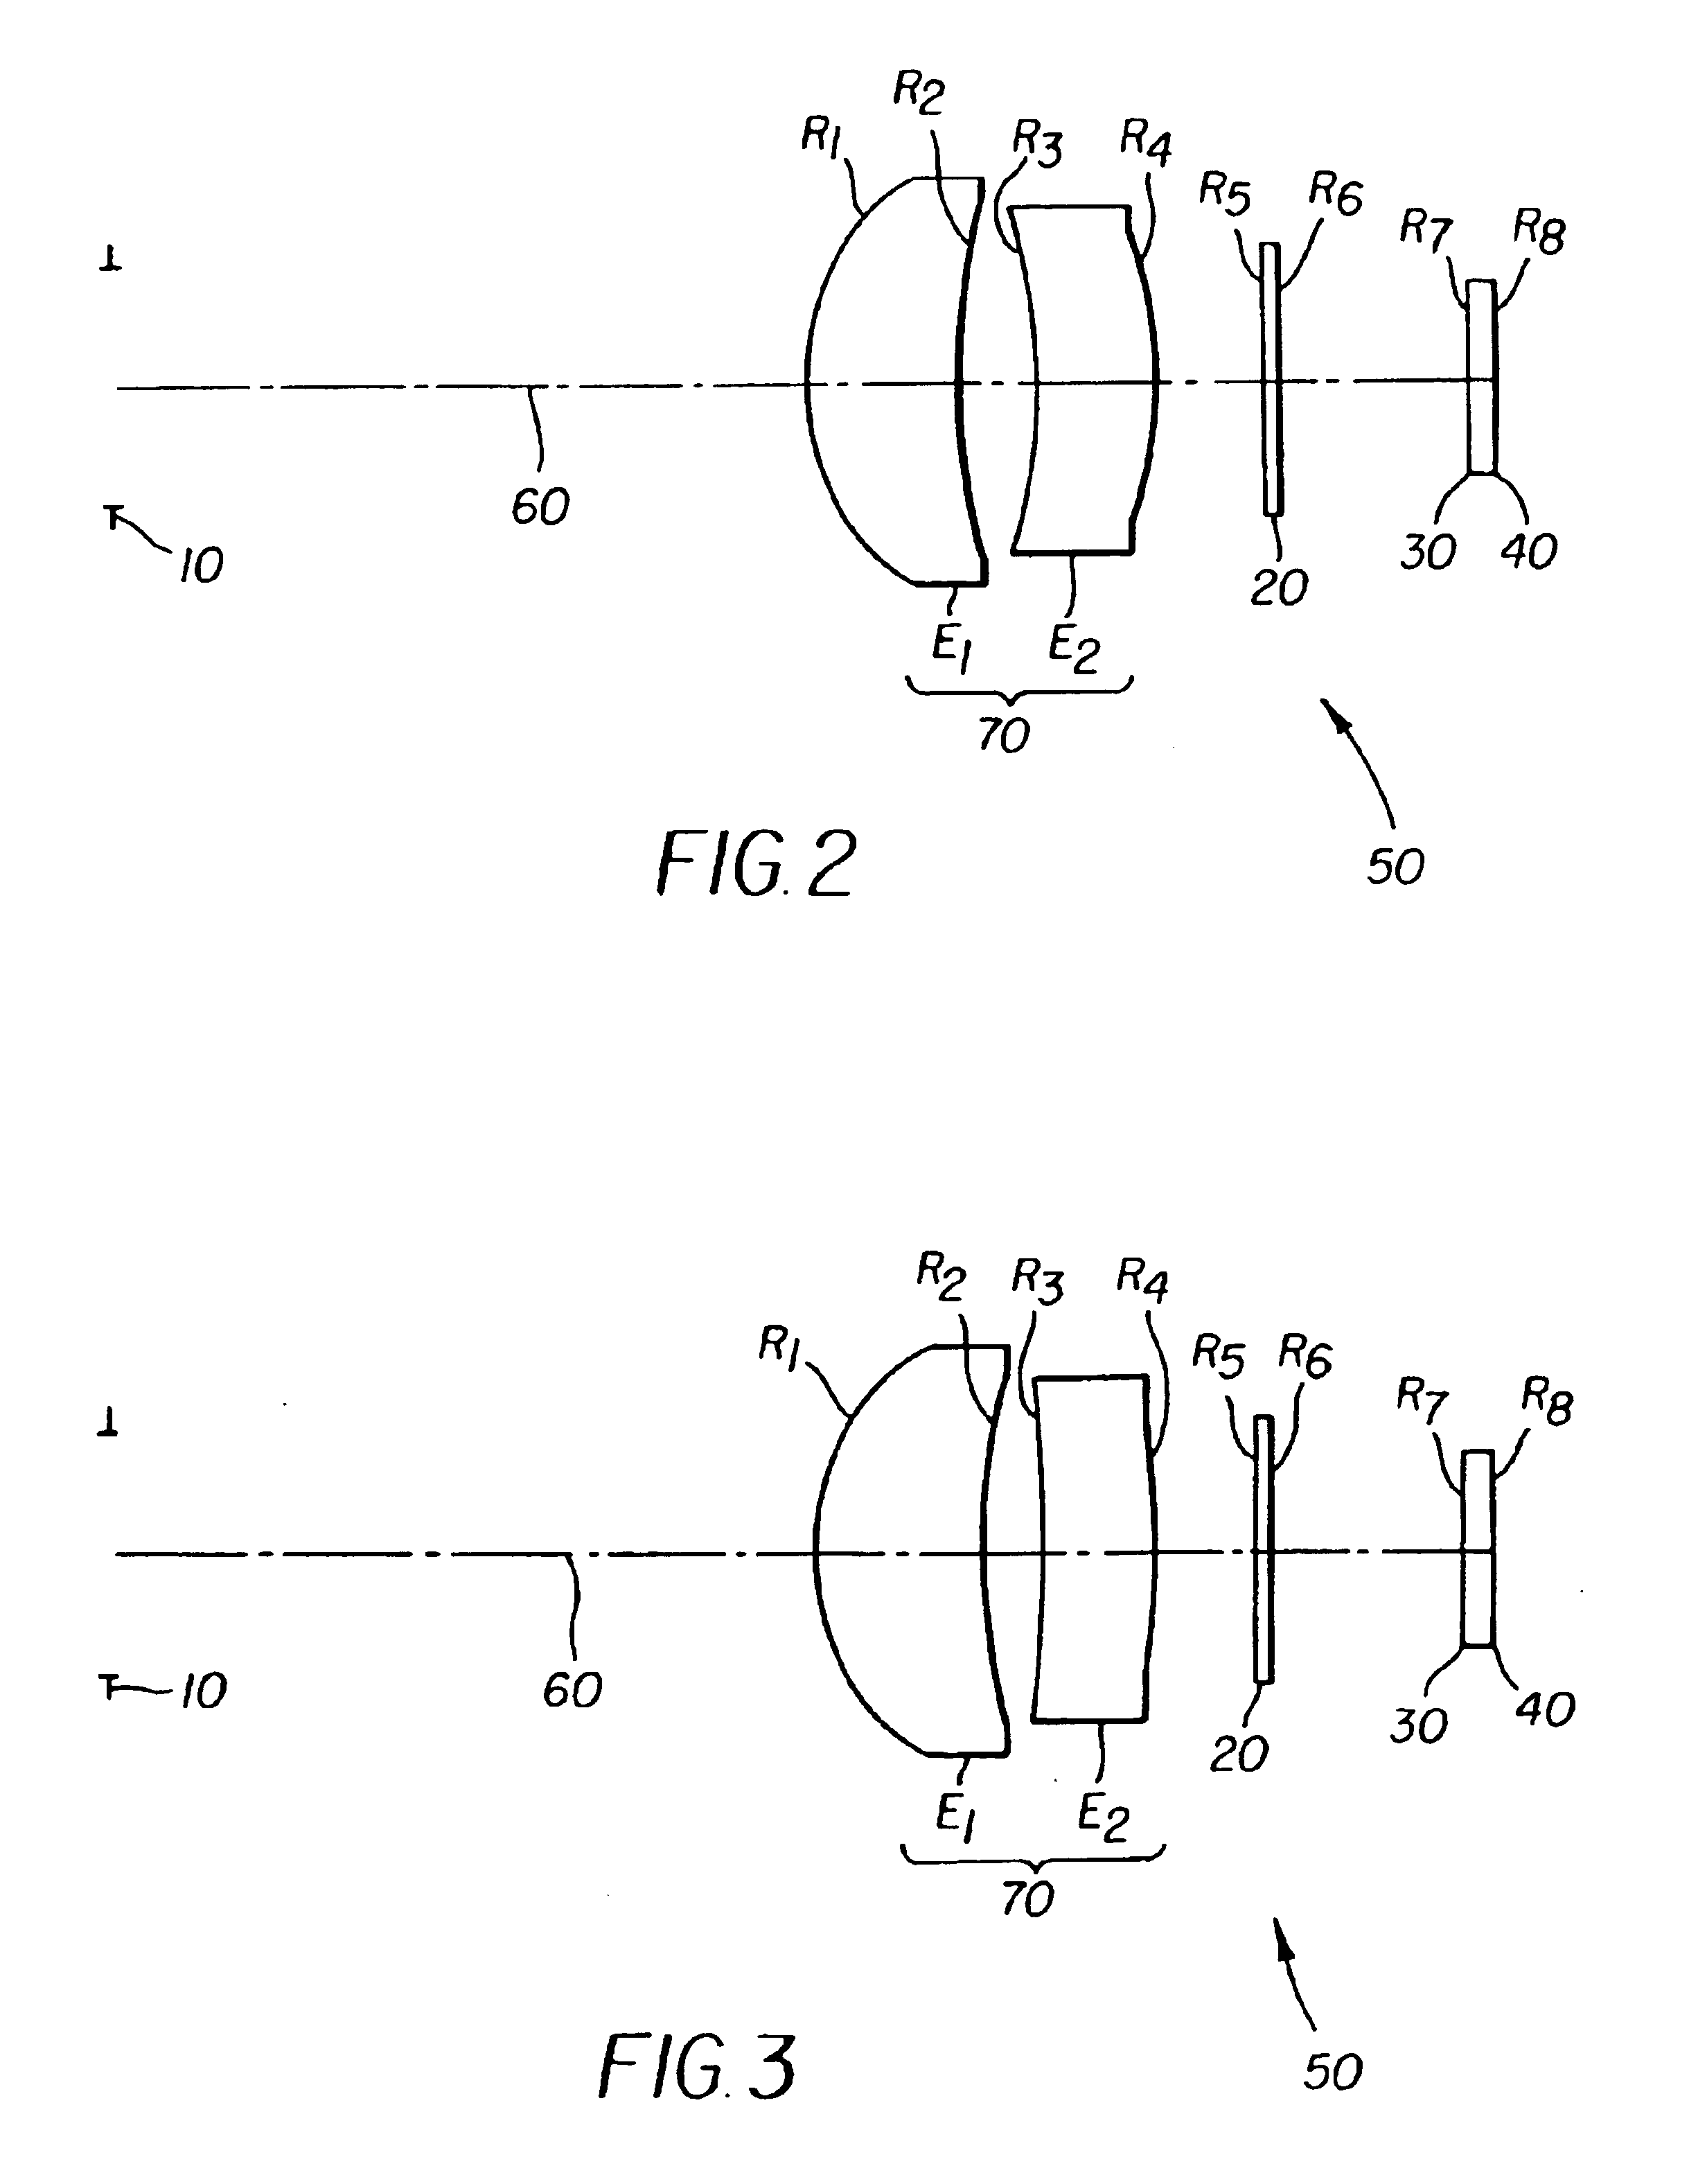 Optical magnifier suitable for use with a microdisplay device